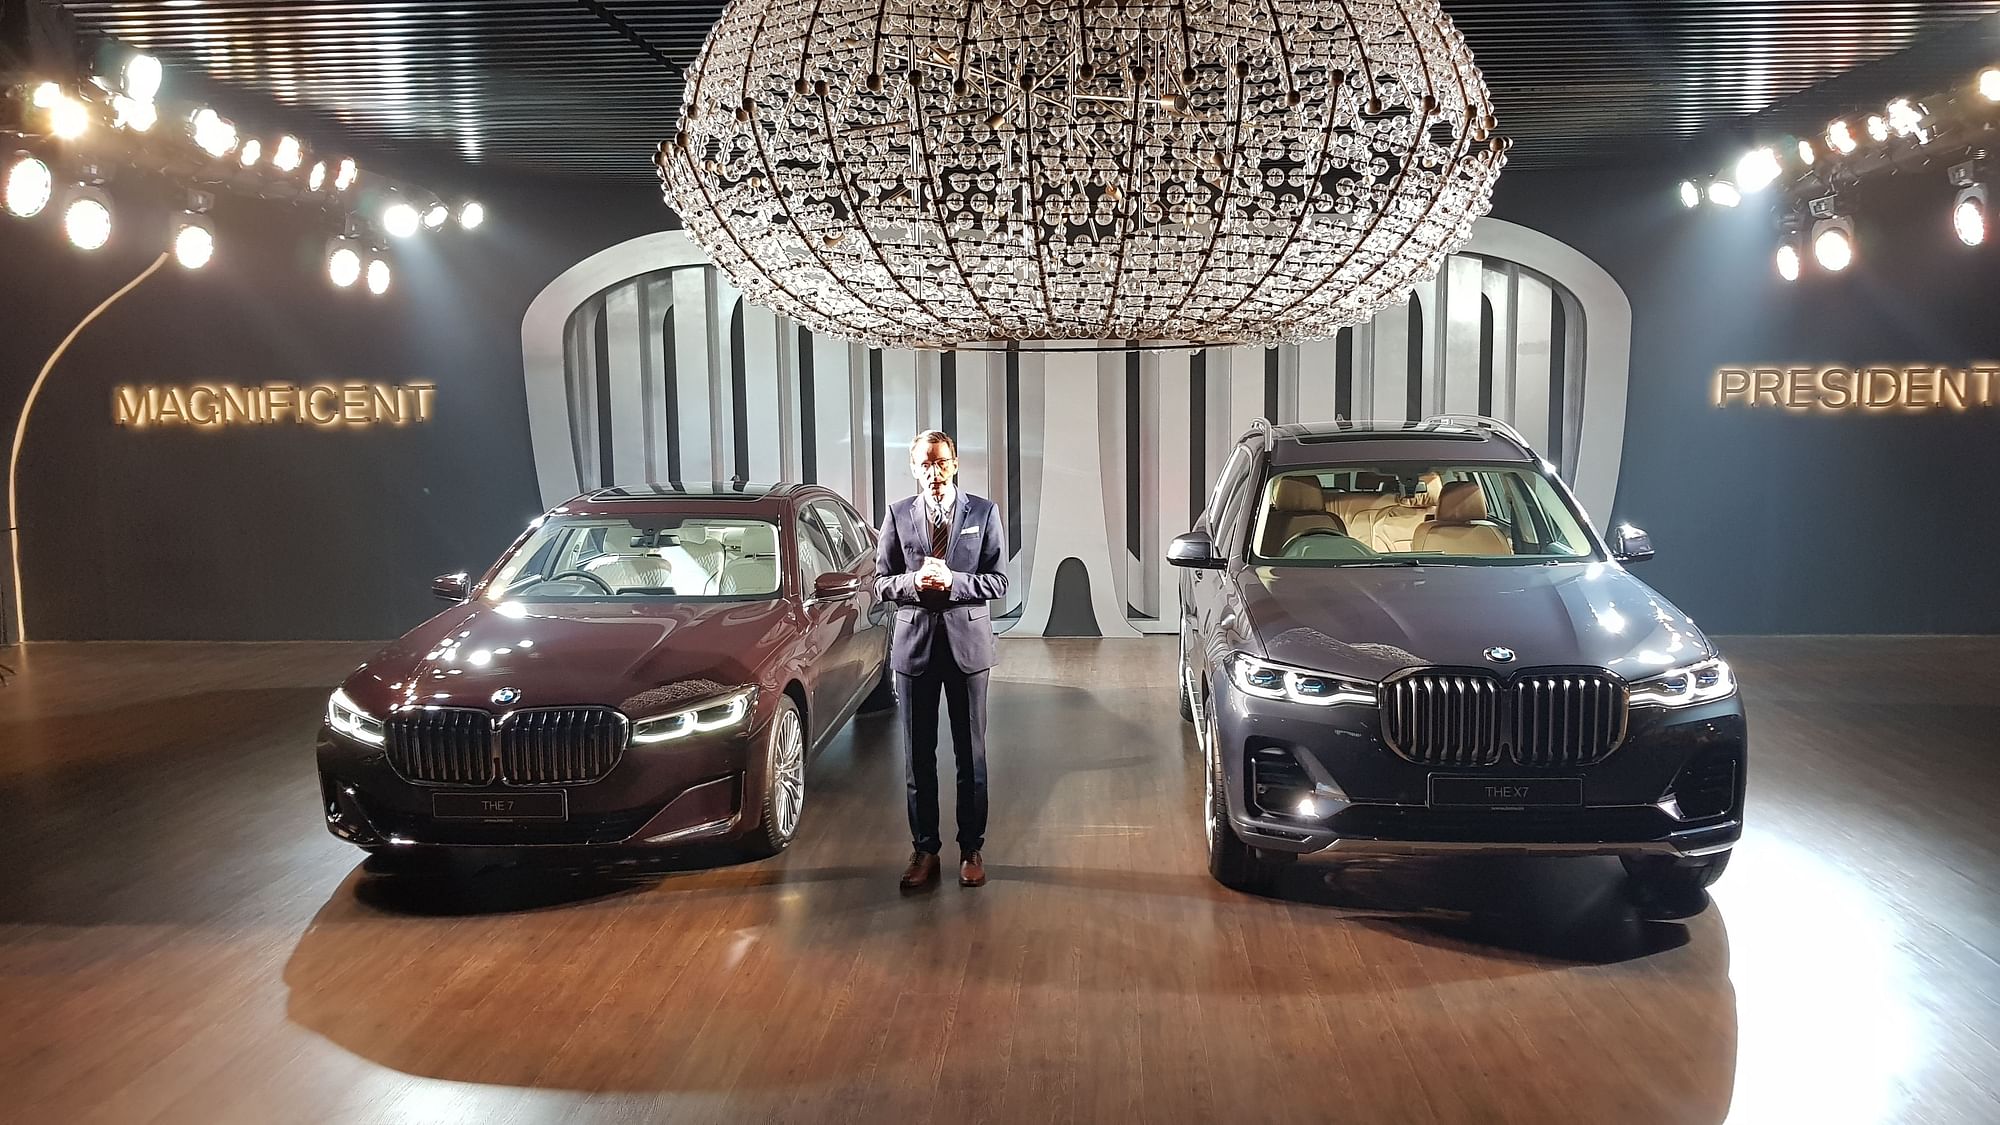 The BMW 7 Series sedan (left) and the X7 SUV.